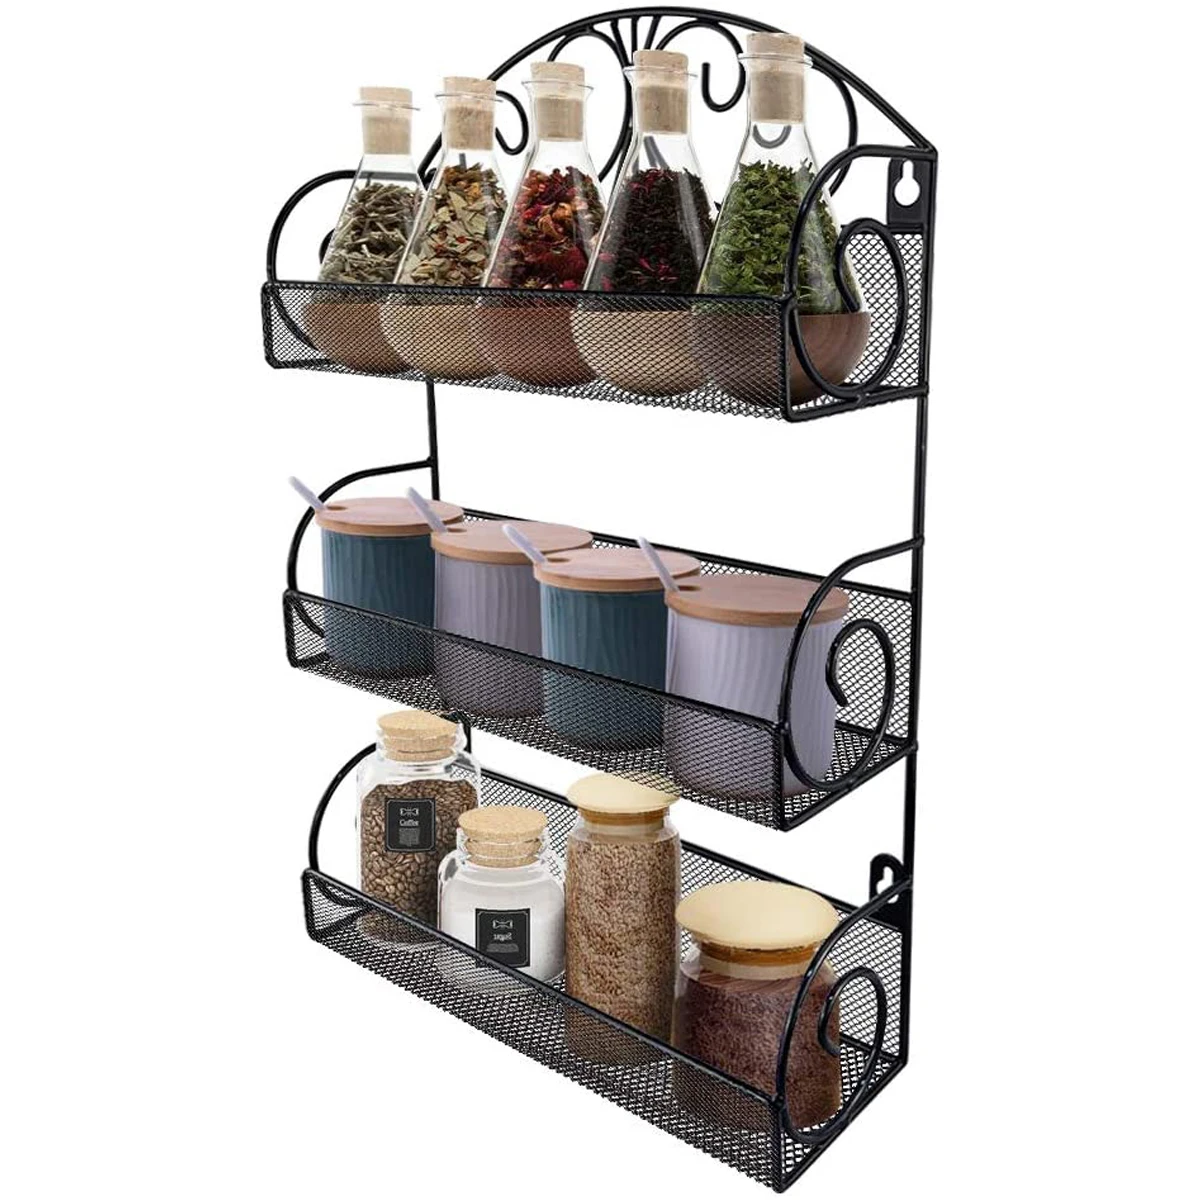 

ORR174 3 Tier Metal Spice Rack Wall Mount Over The Door Organizer,Hanging Wire Mesh Basket for Pantry, Black